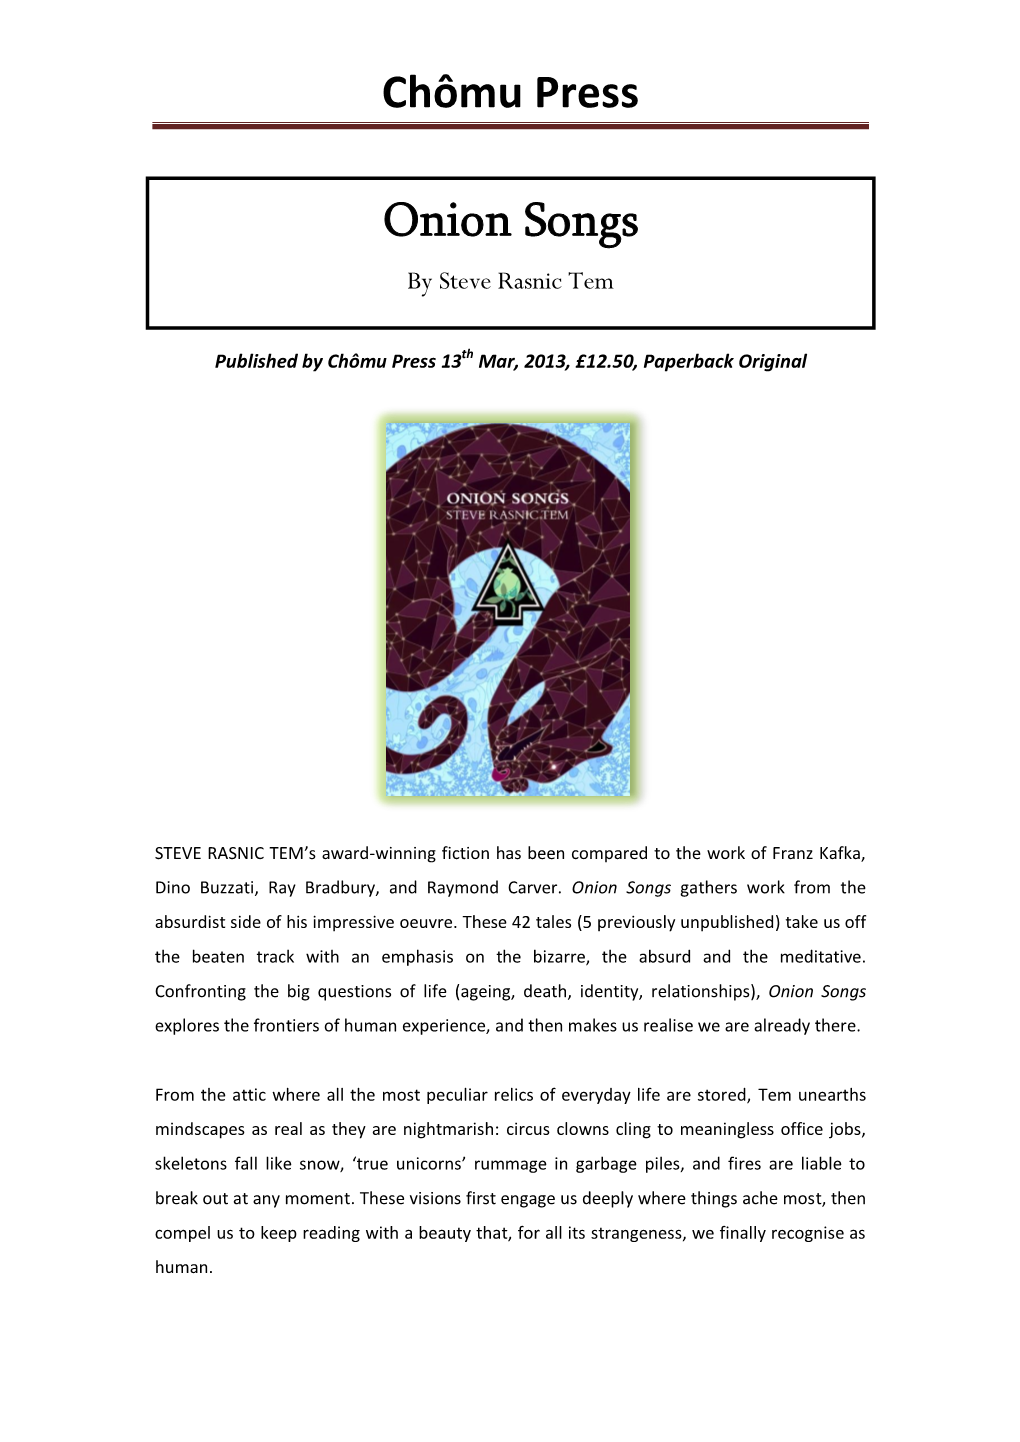 Onion Songs Available for Review